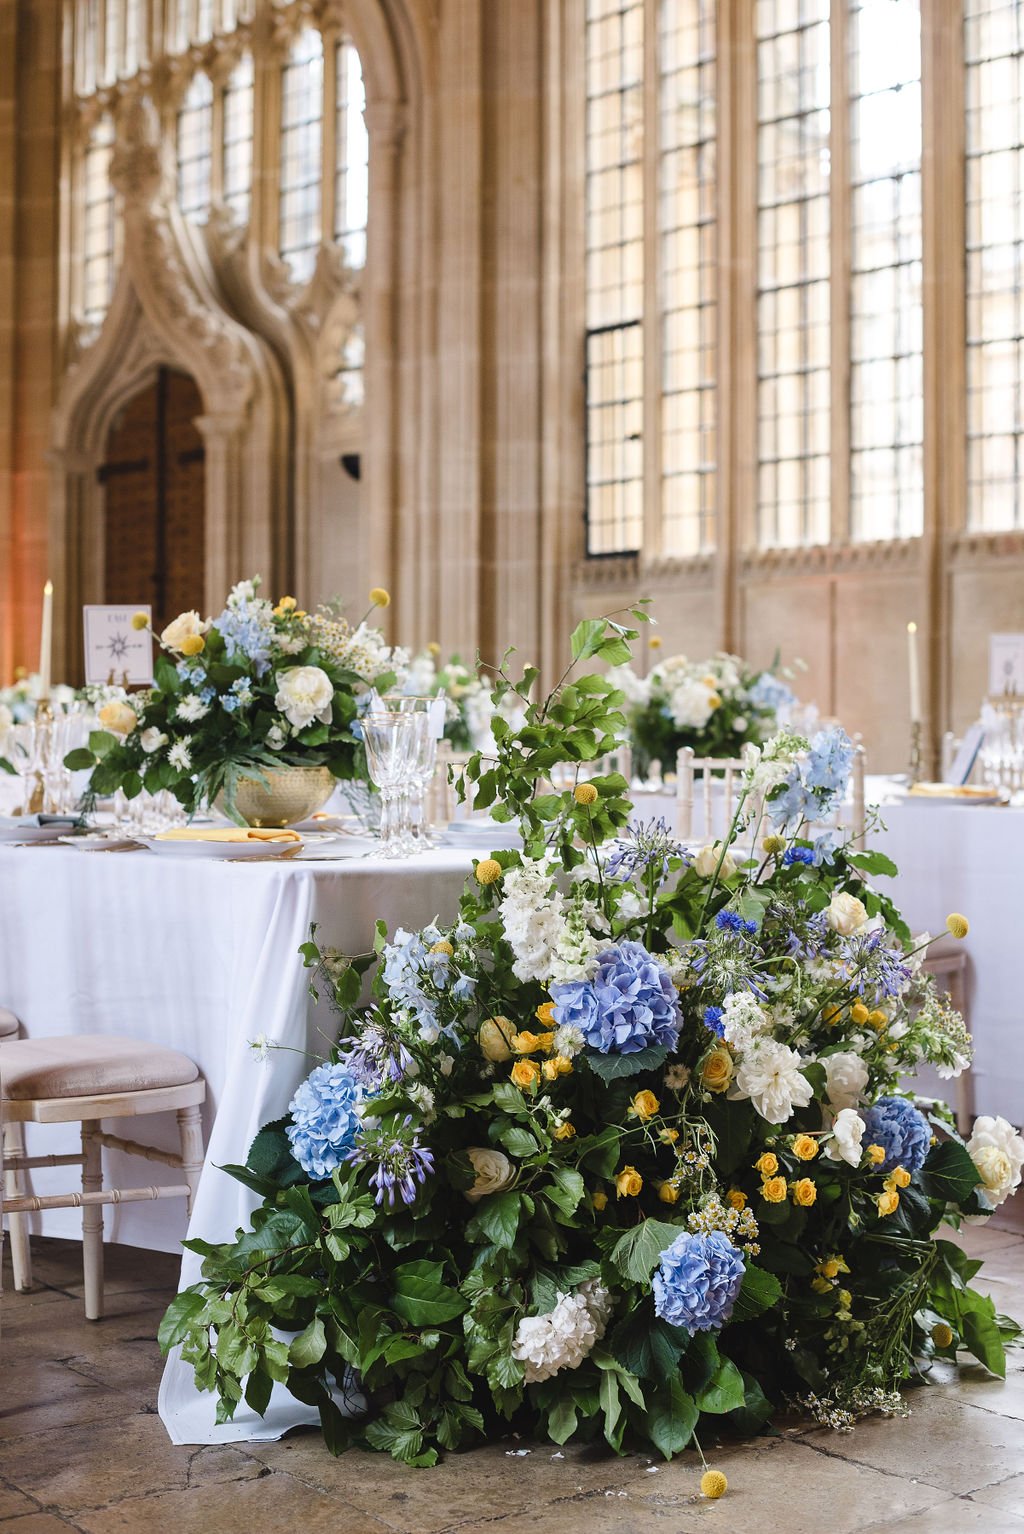 An art deco wedding at The Bodleian Libraries in Oxford